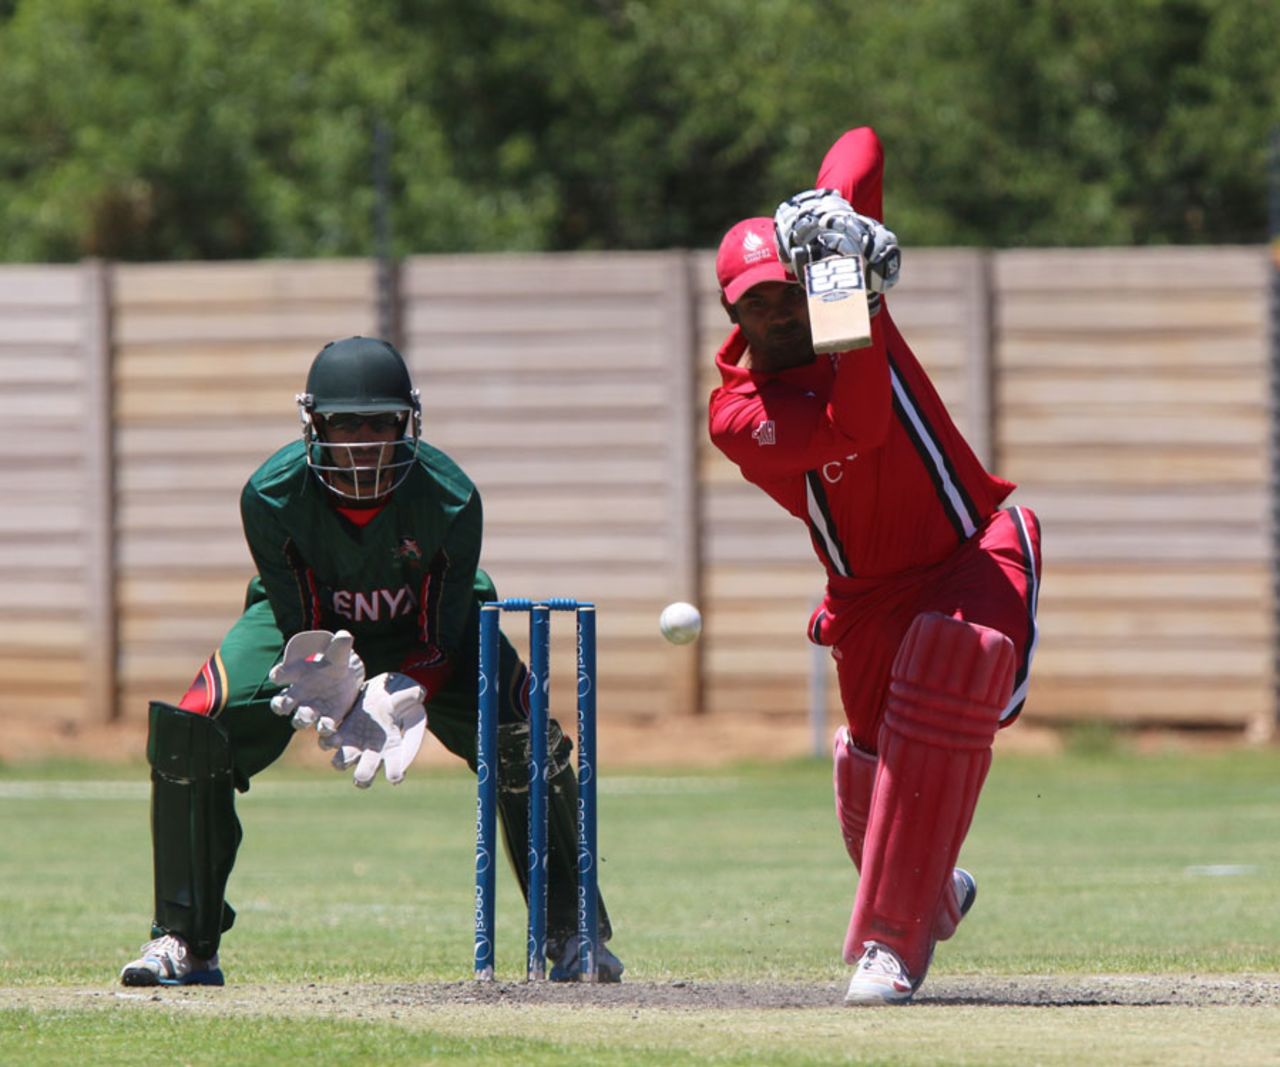 Navneet Dhaliwal scored 93 to power Canada to a competitive total, Canada v Kenya, ICC World Cricket League Division Two, Windhoek, January 18, 2015